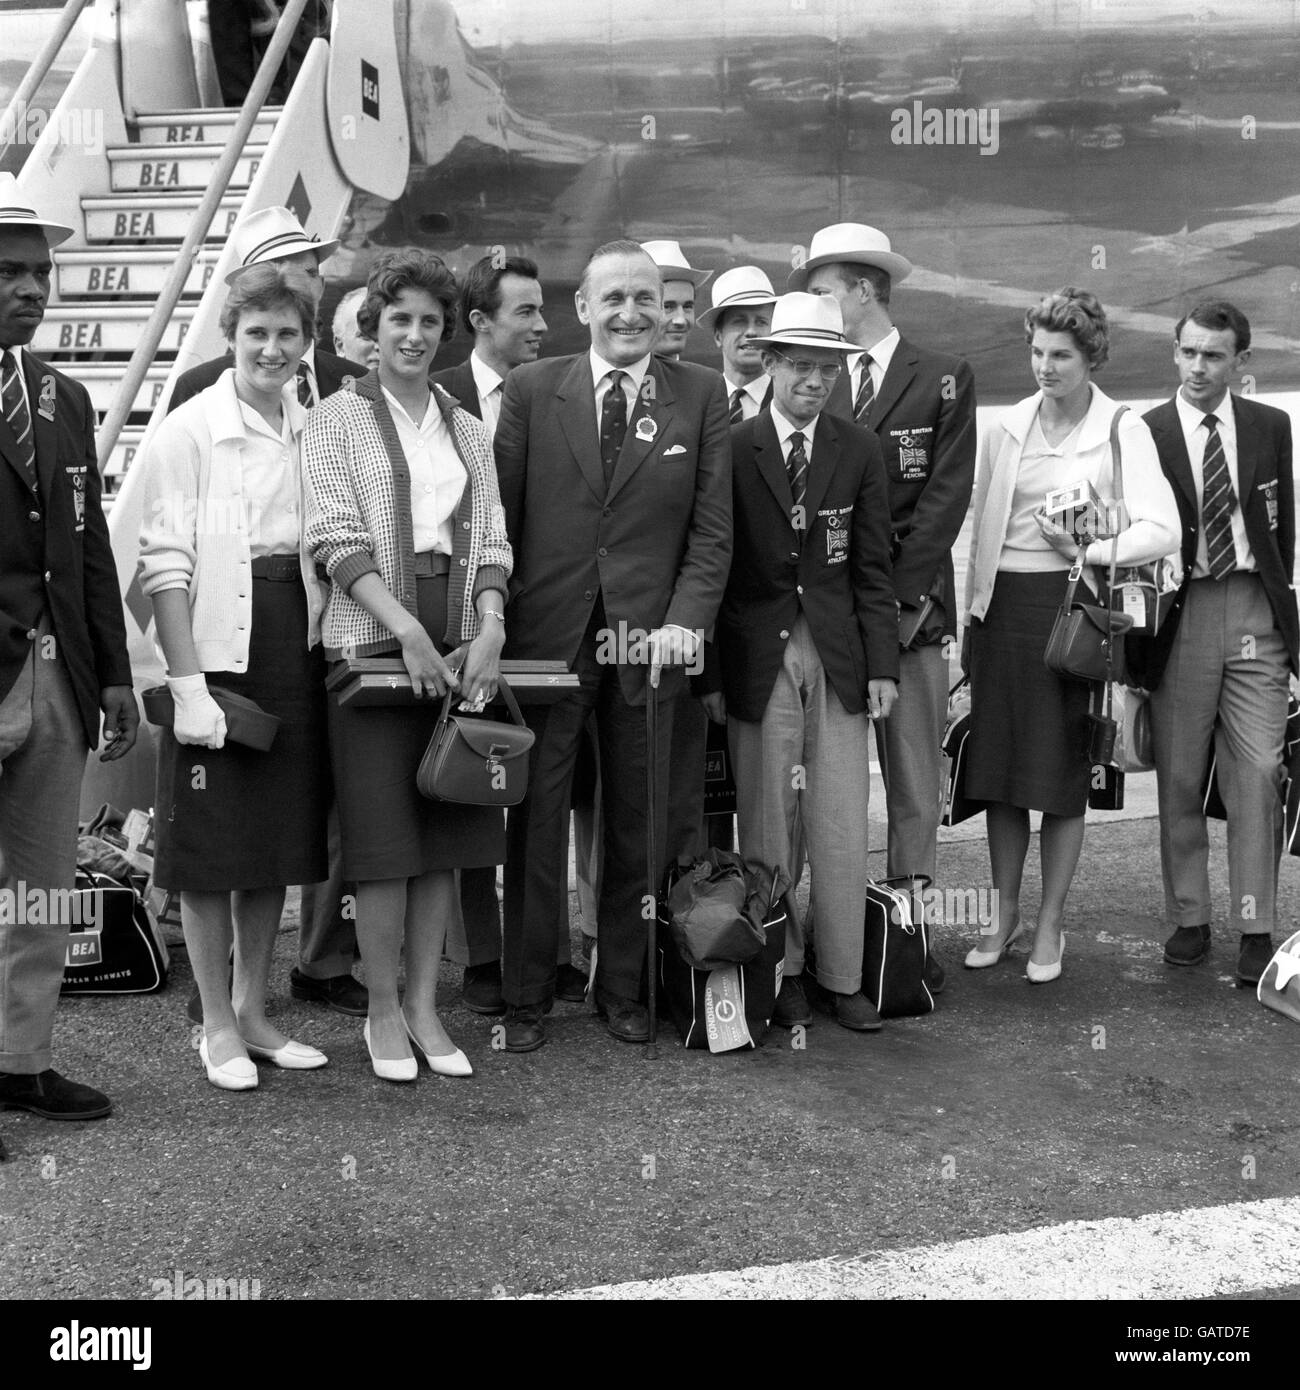 (L-R) Some of the British medallists pictured upon their arrival at London Airport: High jumper Dorothy Shirley (silver), 100m runner Dorothy Hyman (silver), Lord Burghley, The 6th Marquis of Exeter, 50km walker Don Thompson (gold), and 80m hurdler Carol Quinton (silver) Stock Photo